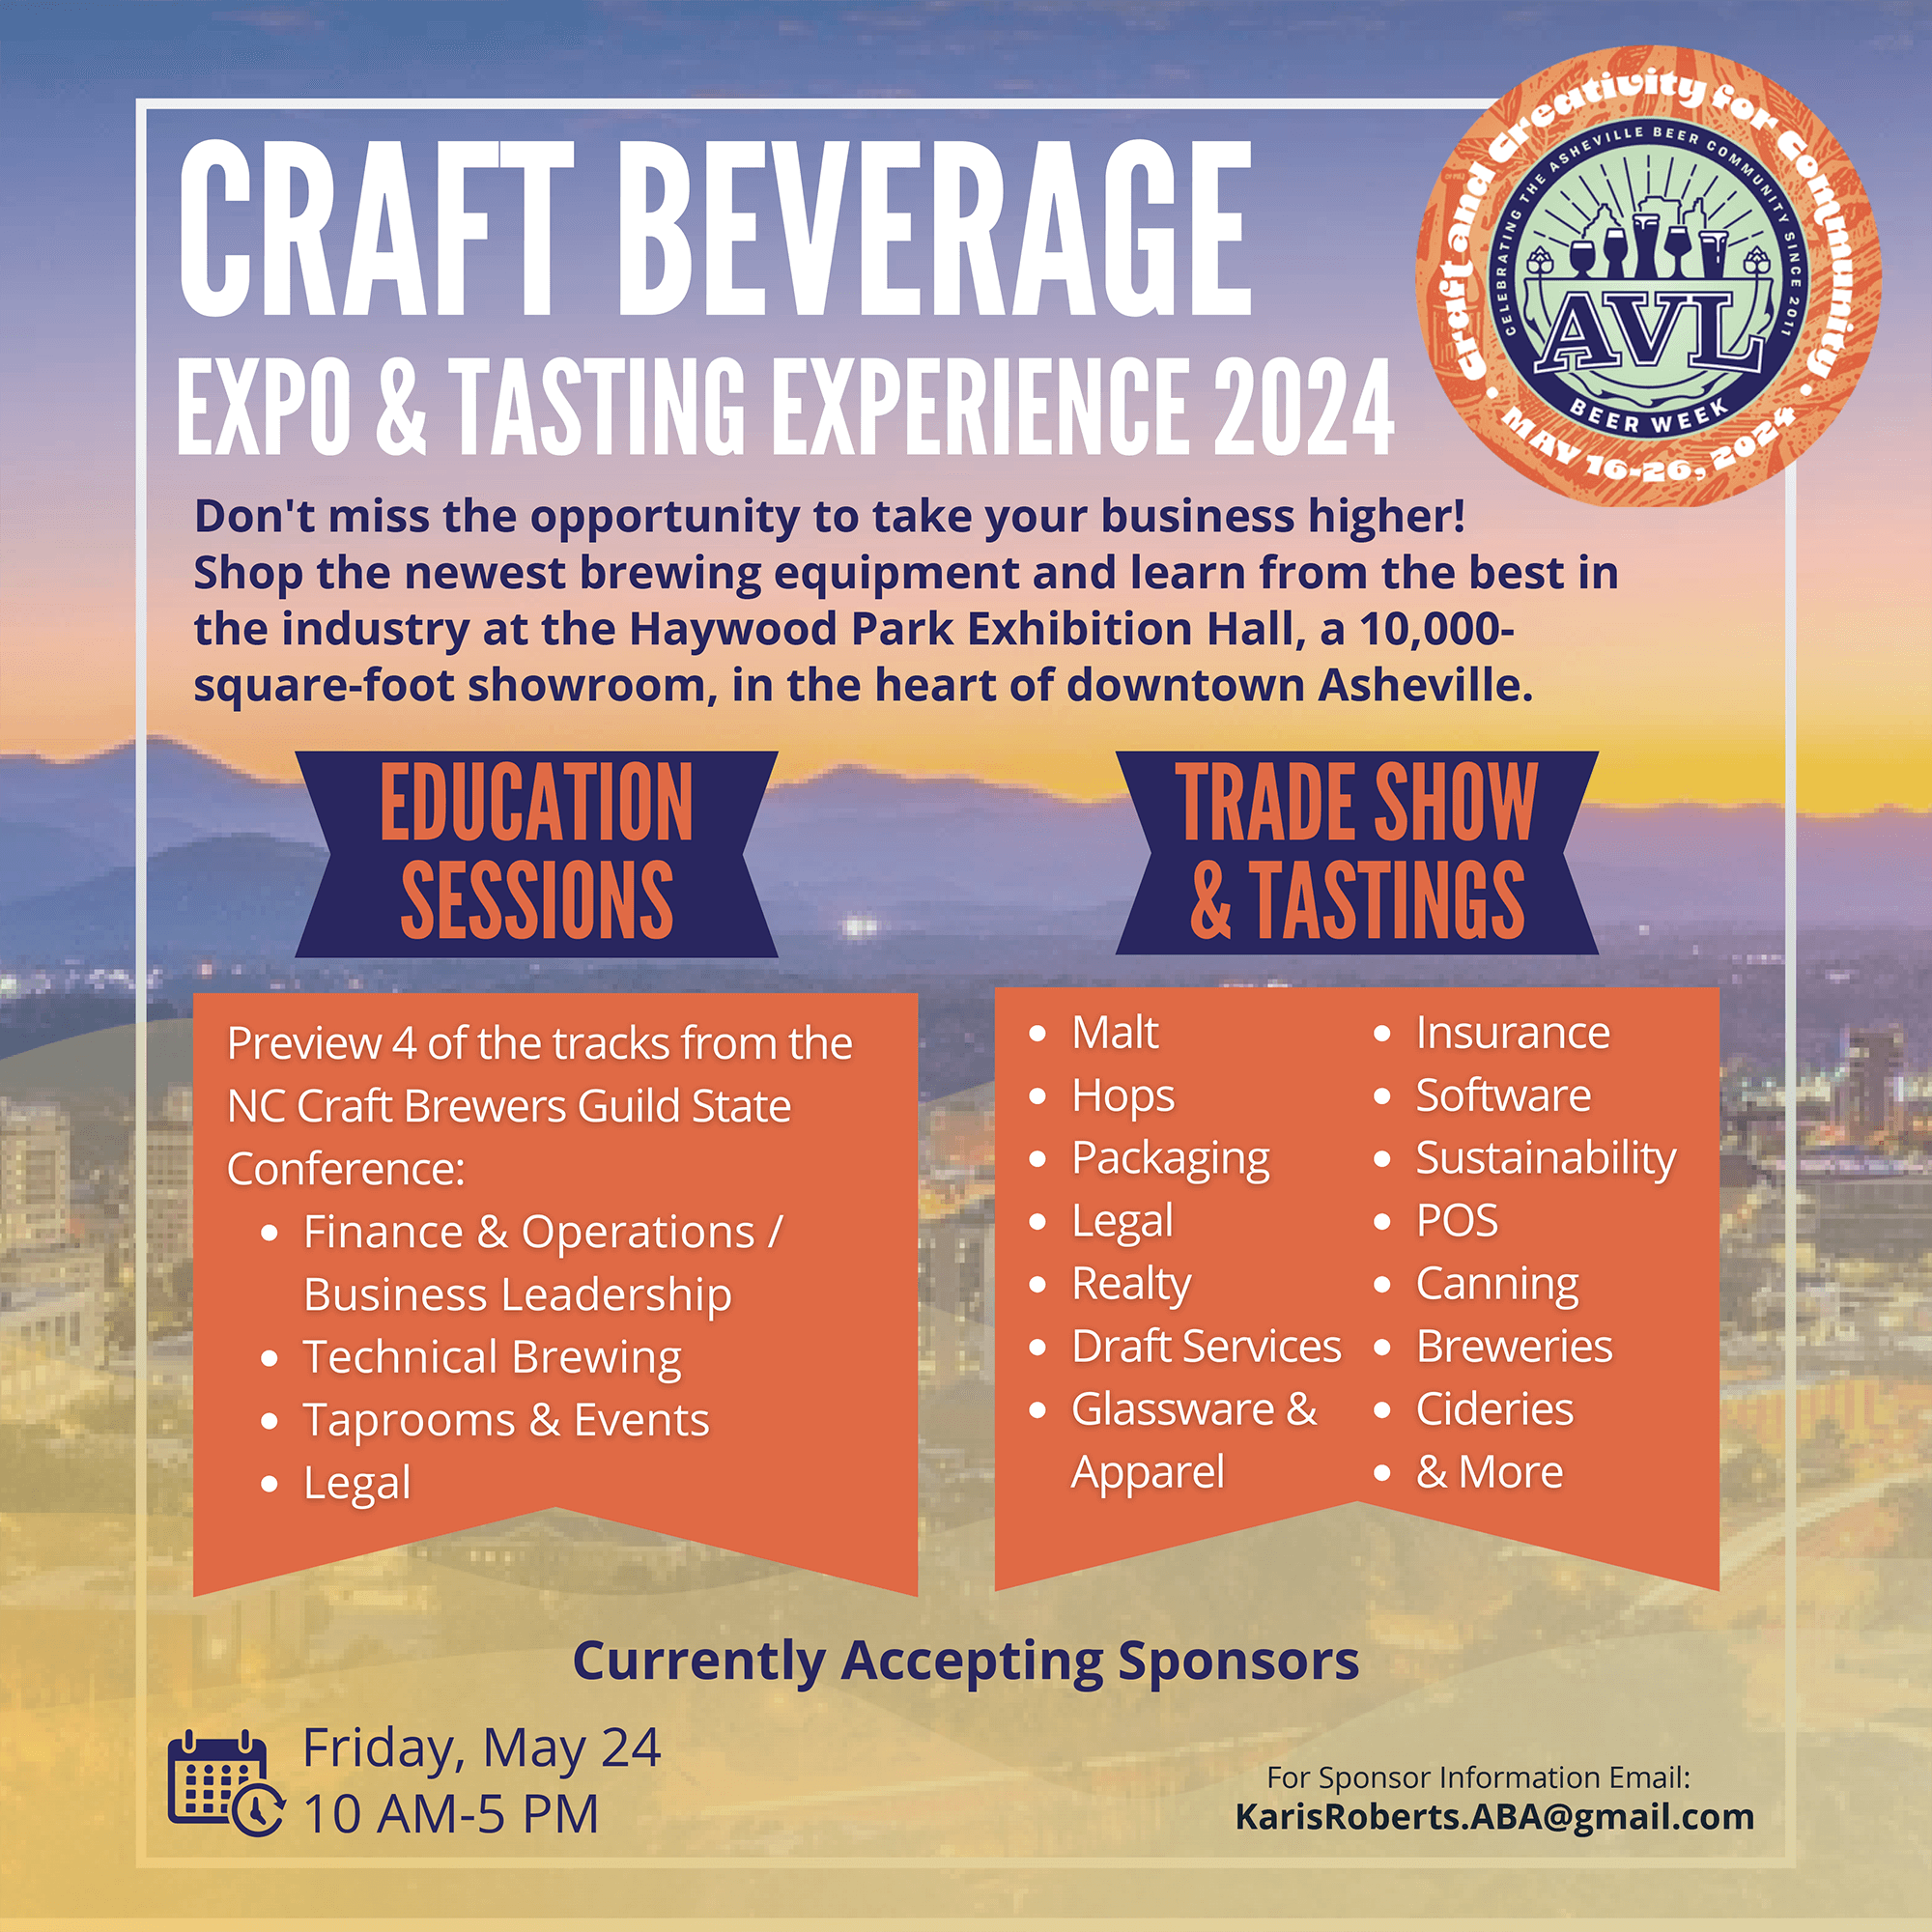 2024 Craft Beverage Expo & Tasting Experience Asheville, NC's